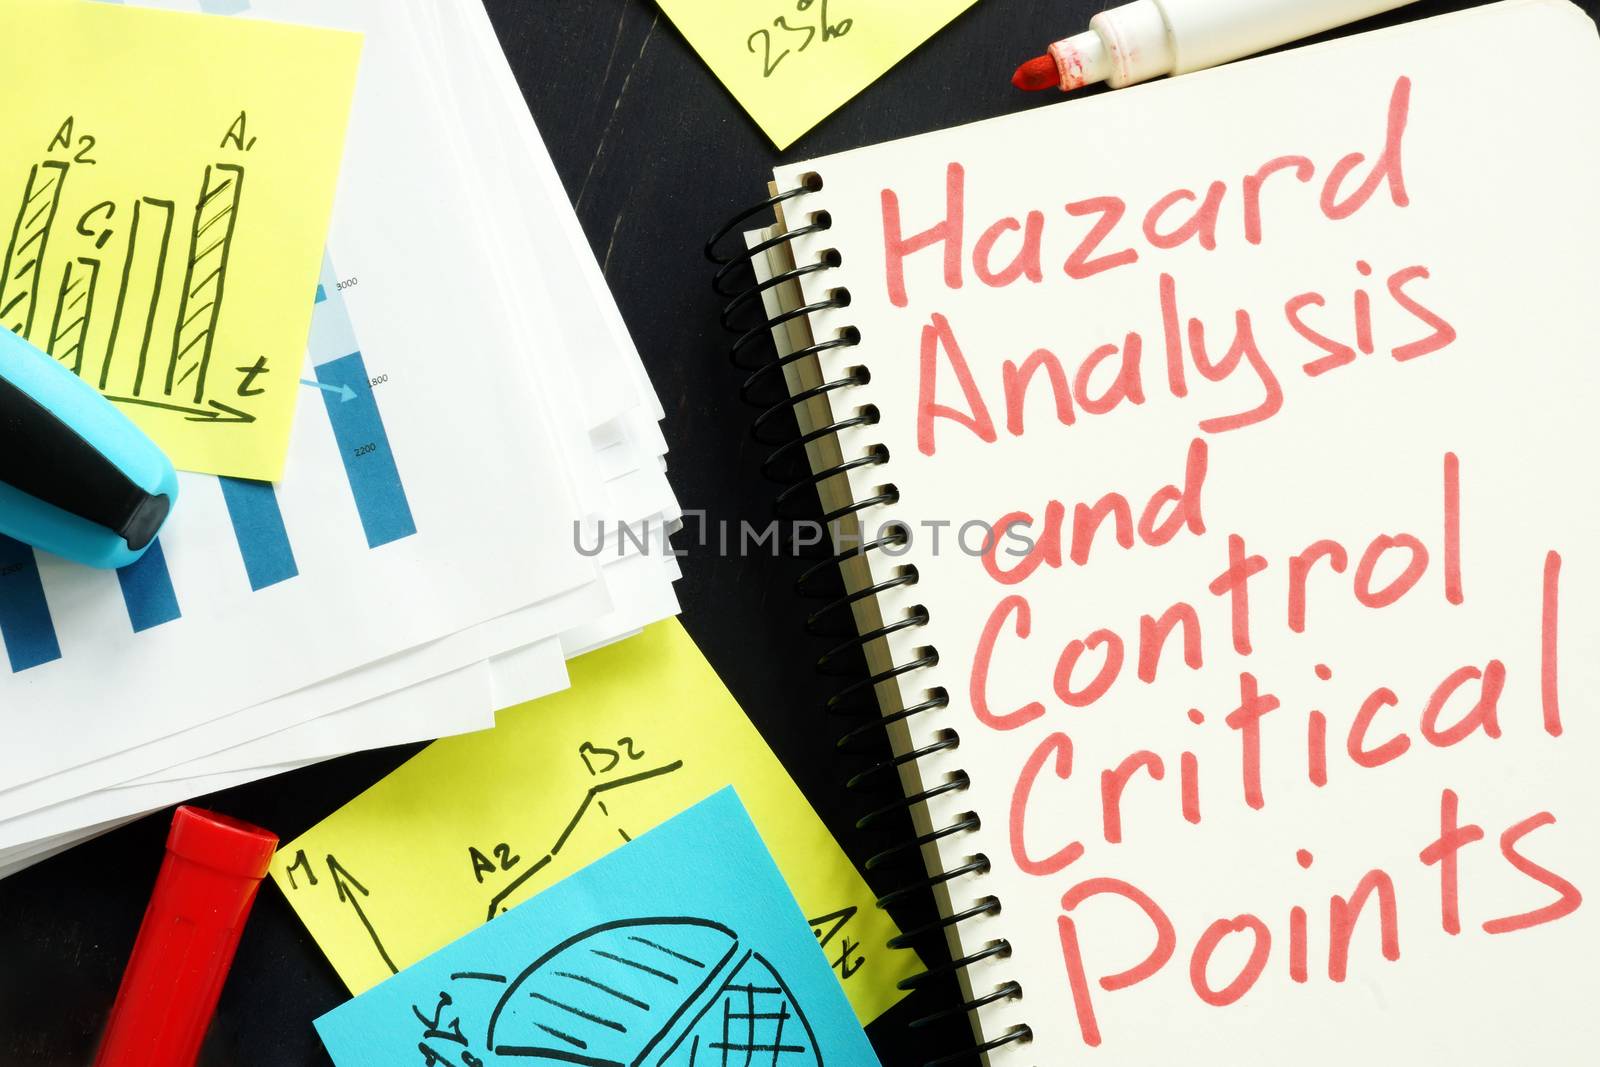 Hazard Analysis and Critical Control Points HACCP written on the page.